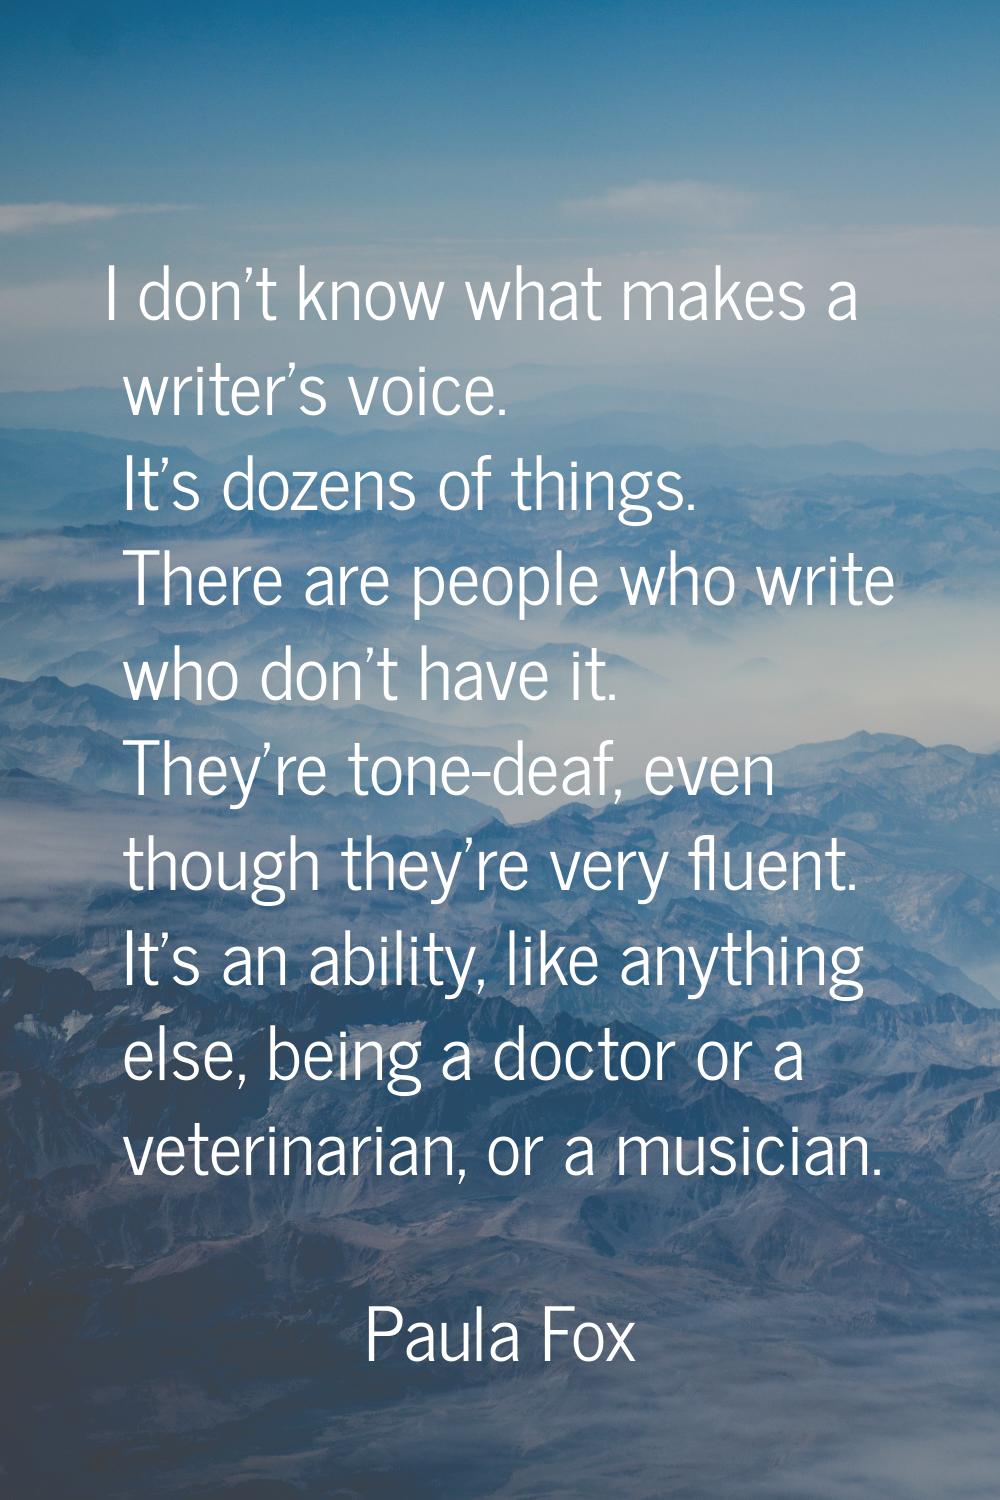 I don't know what makes a writer's voice. It's dozens of things. There are people who write who don